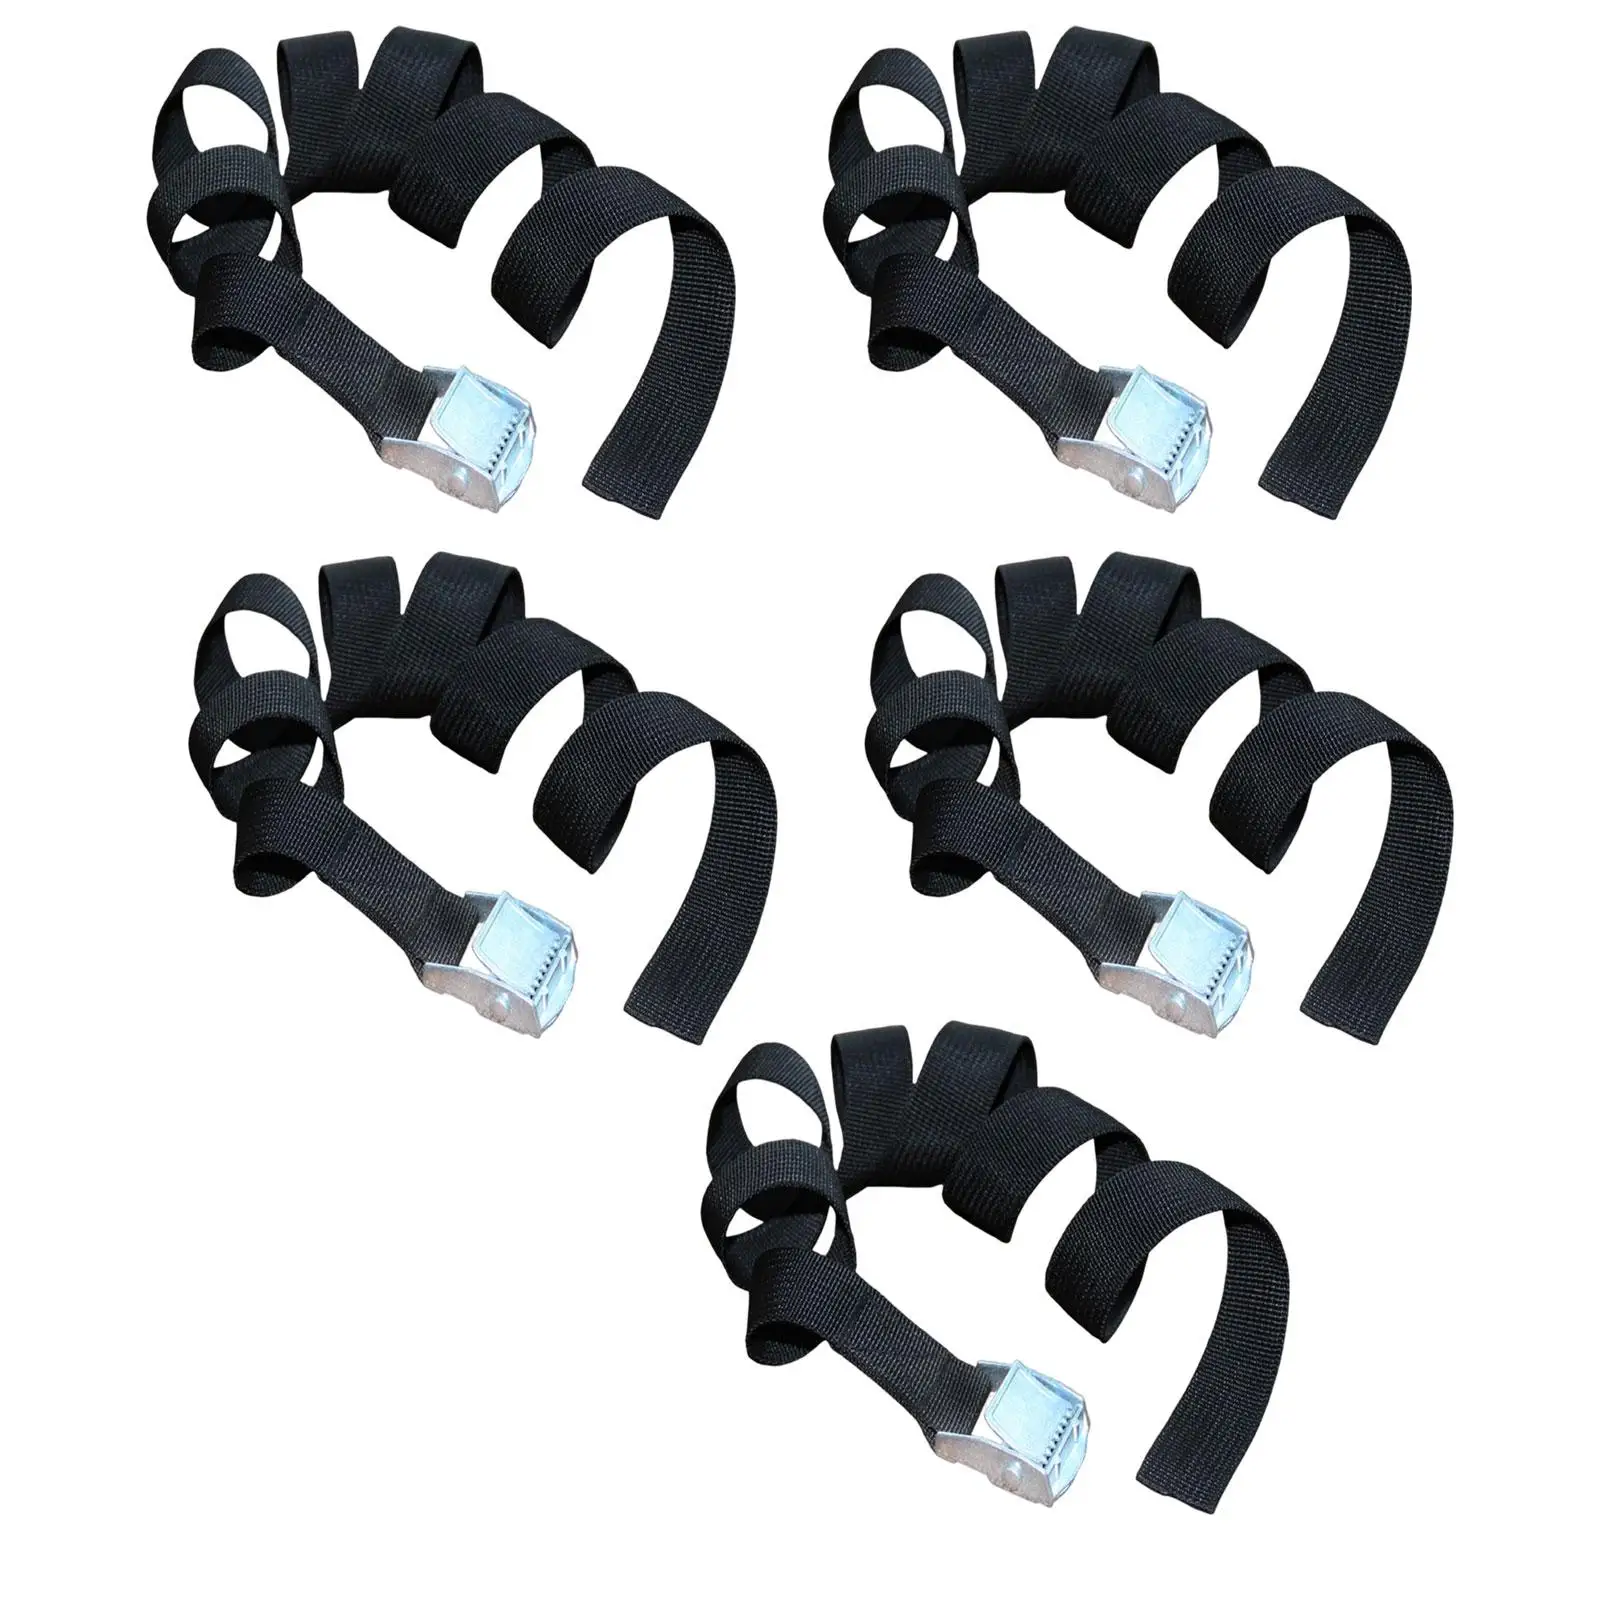 5x Tie Down Strap with Buckle Lashing Straps Heavy Duty Tensioner Luggage Fixing Straps for Roof Rack Travel Fixing